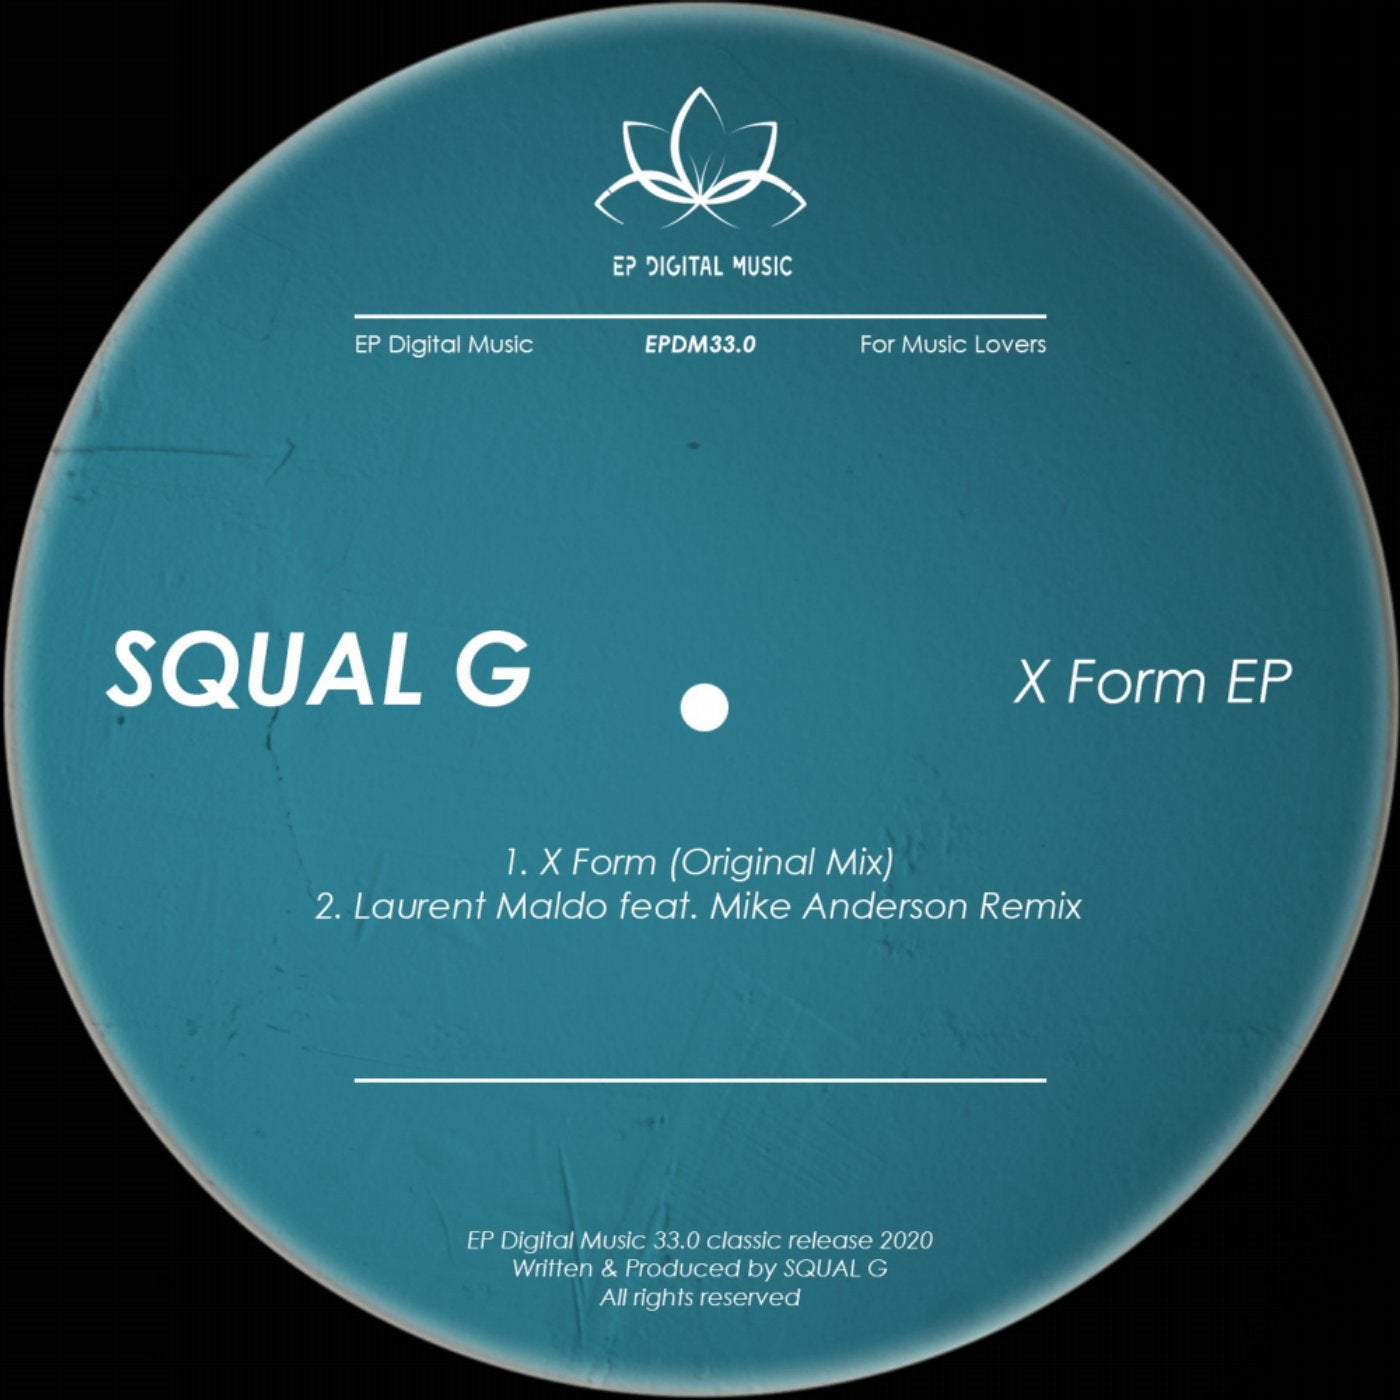 X Form EP